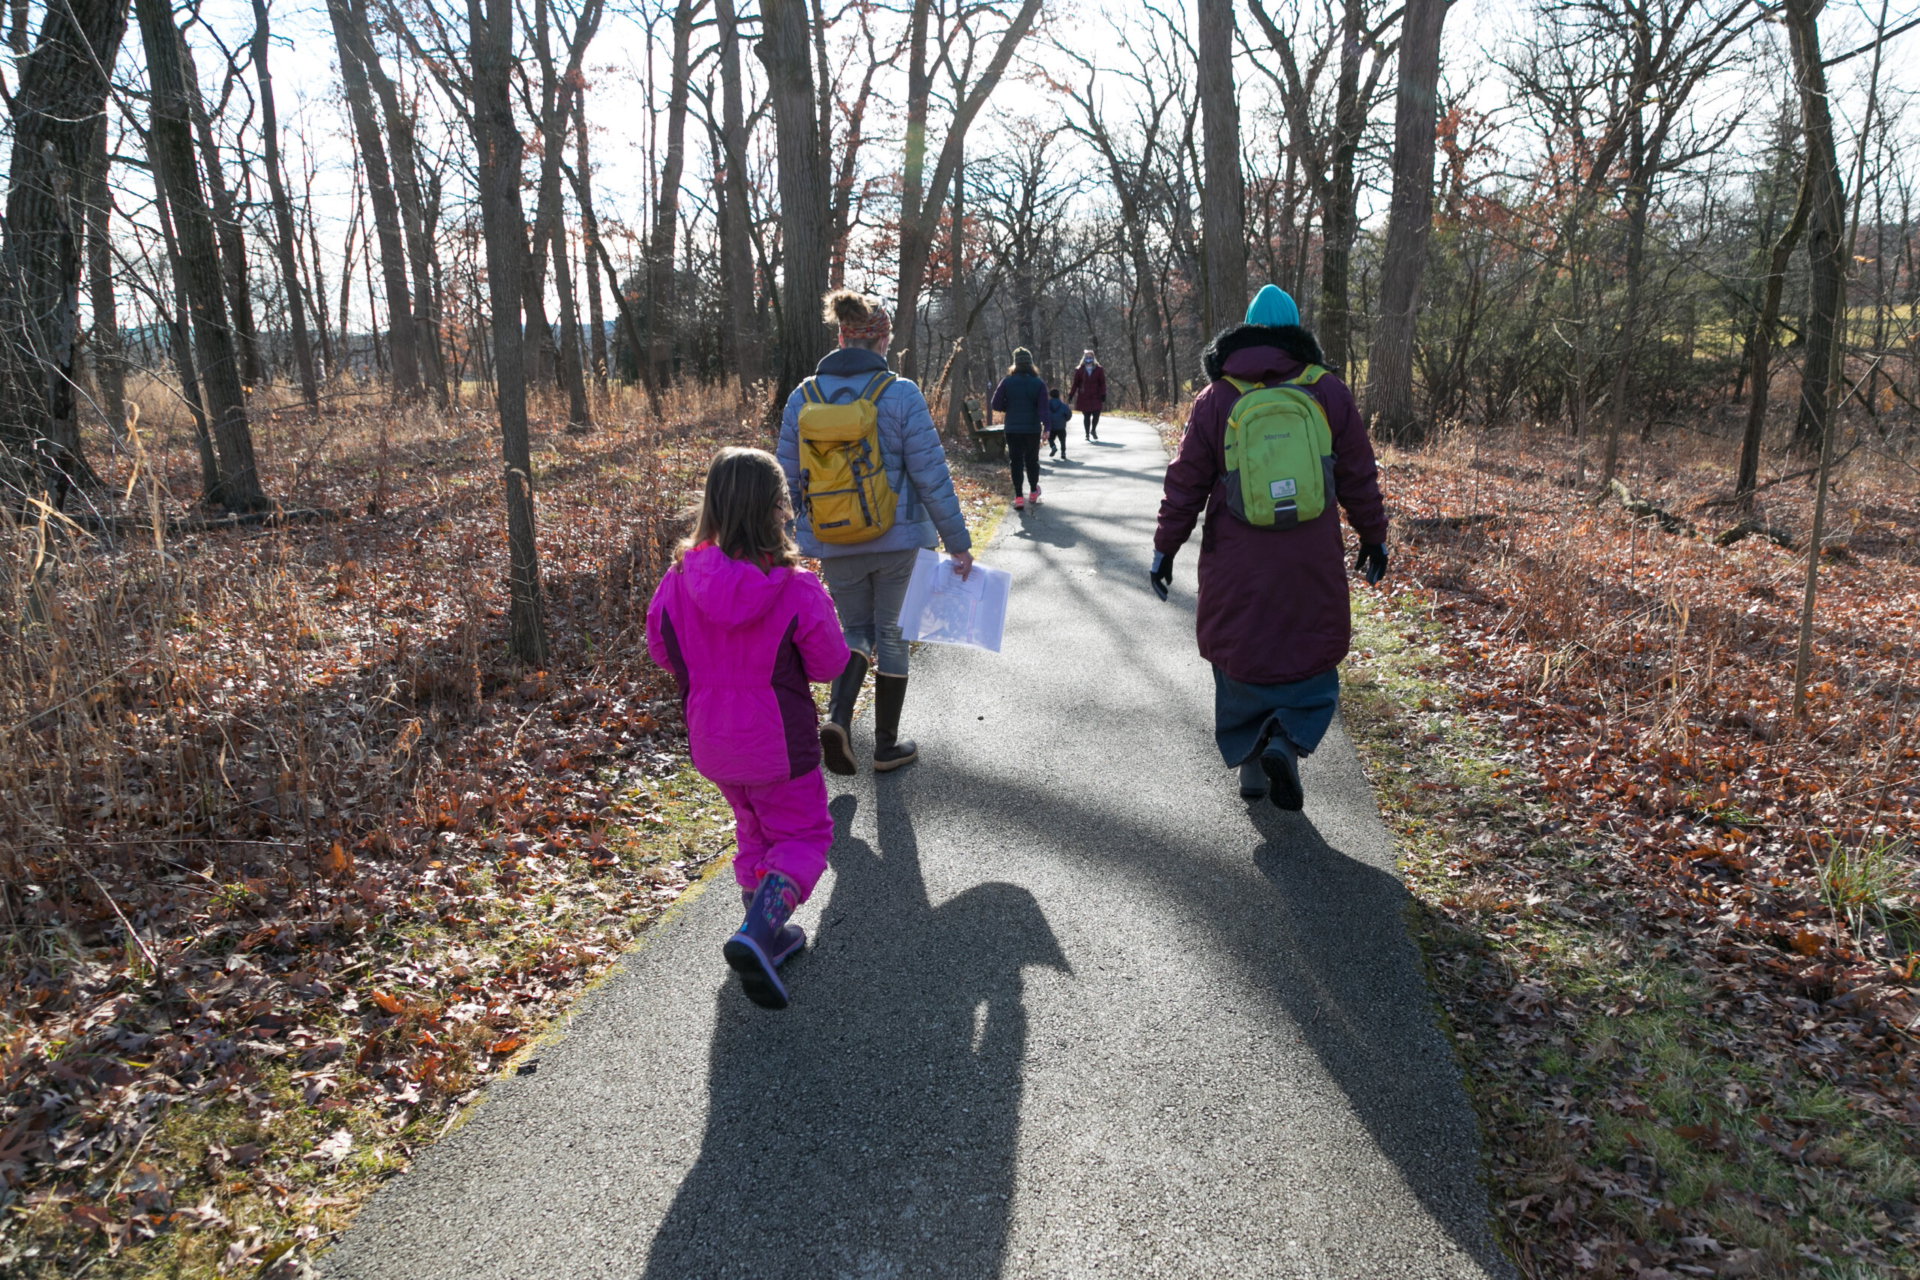 Kids going on a winter hike with instructors on a paved path through the woods.